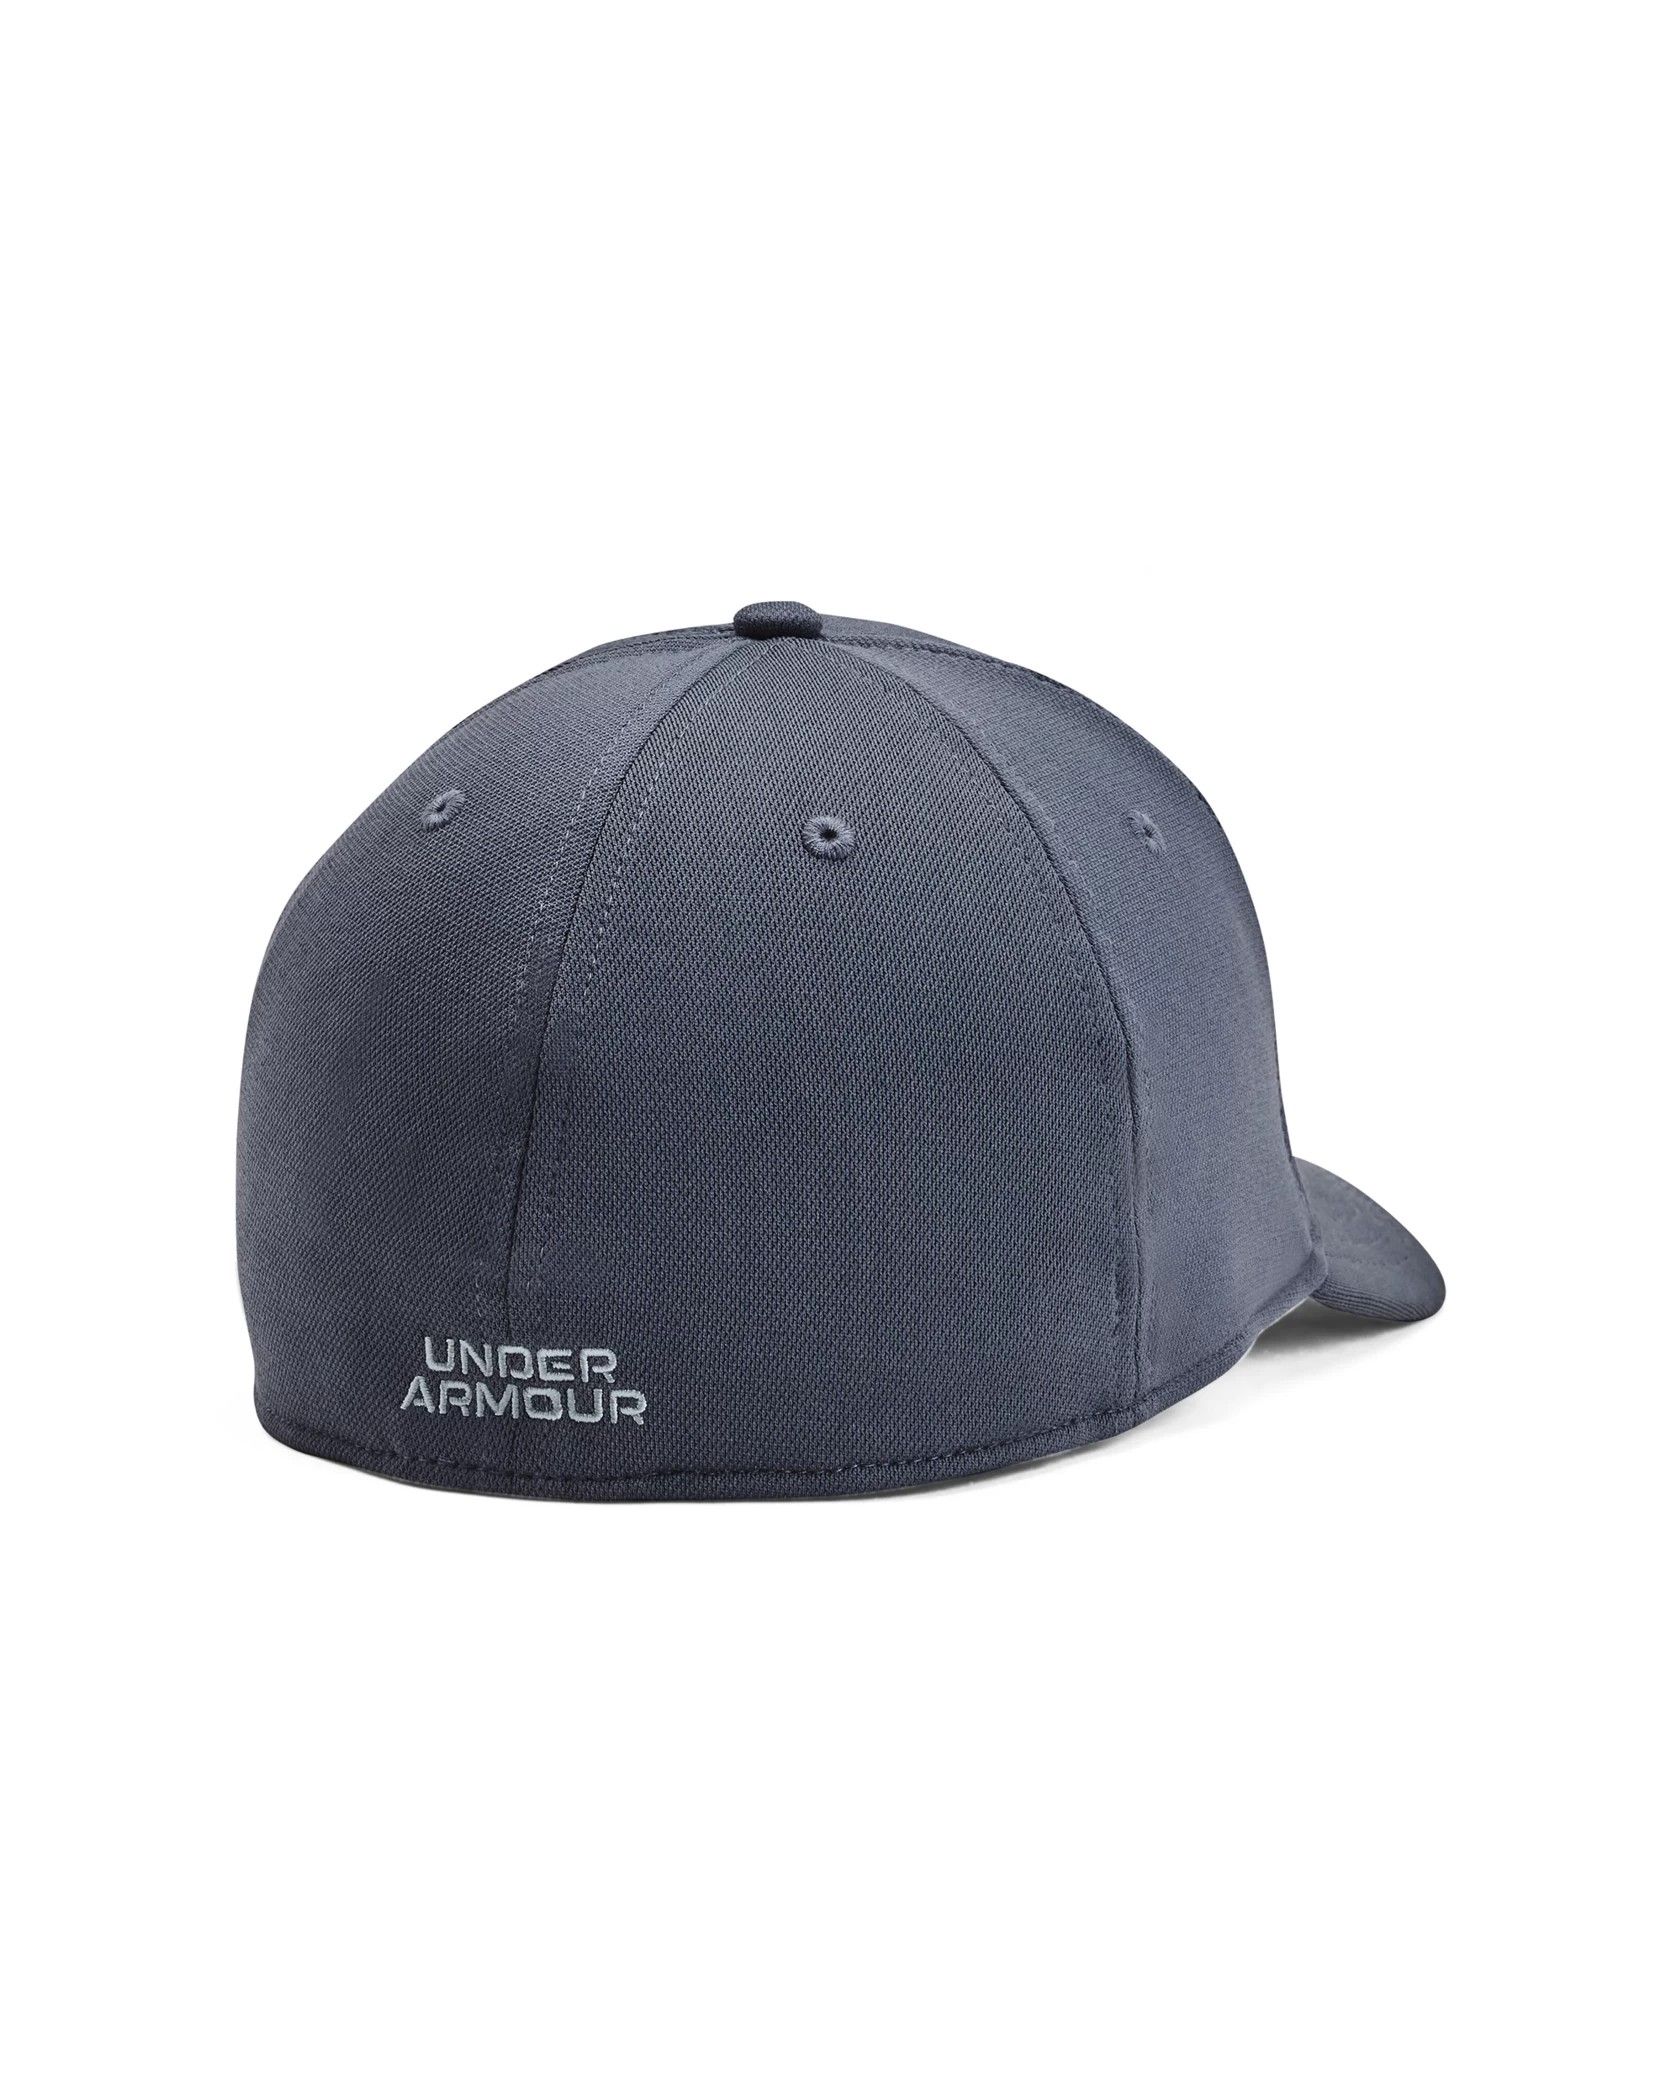 UNDER ARMOUR Men Embroidered Blitzing Baseball Cap (L/XL) by Myntra